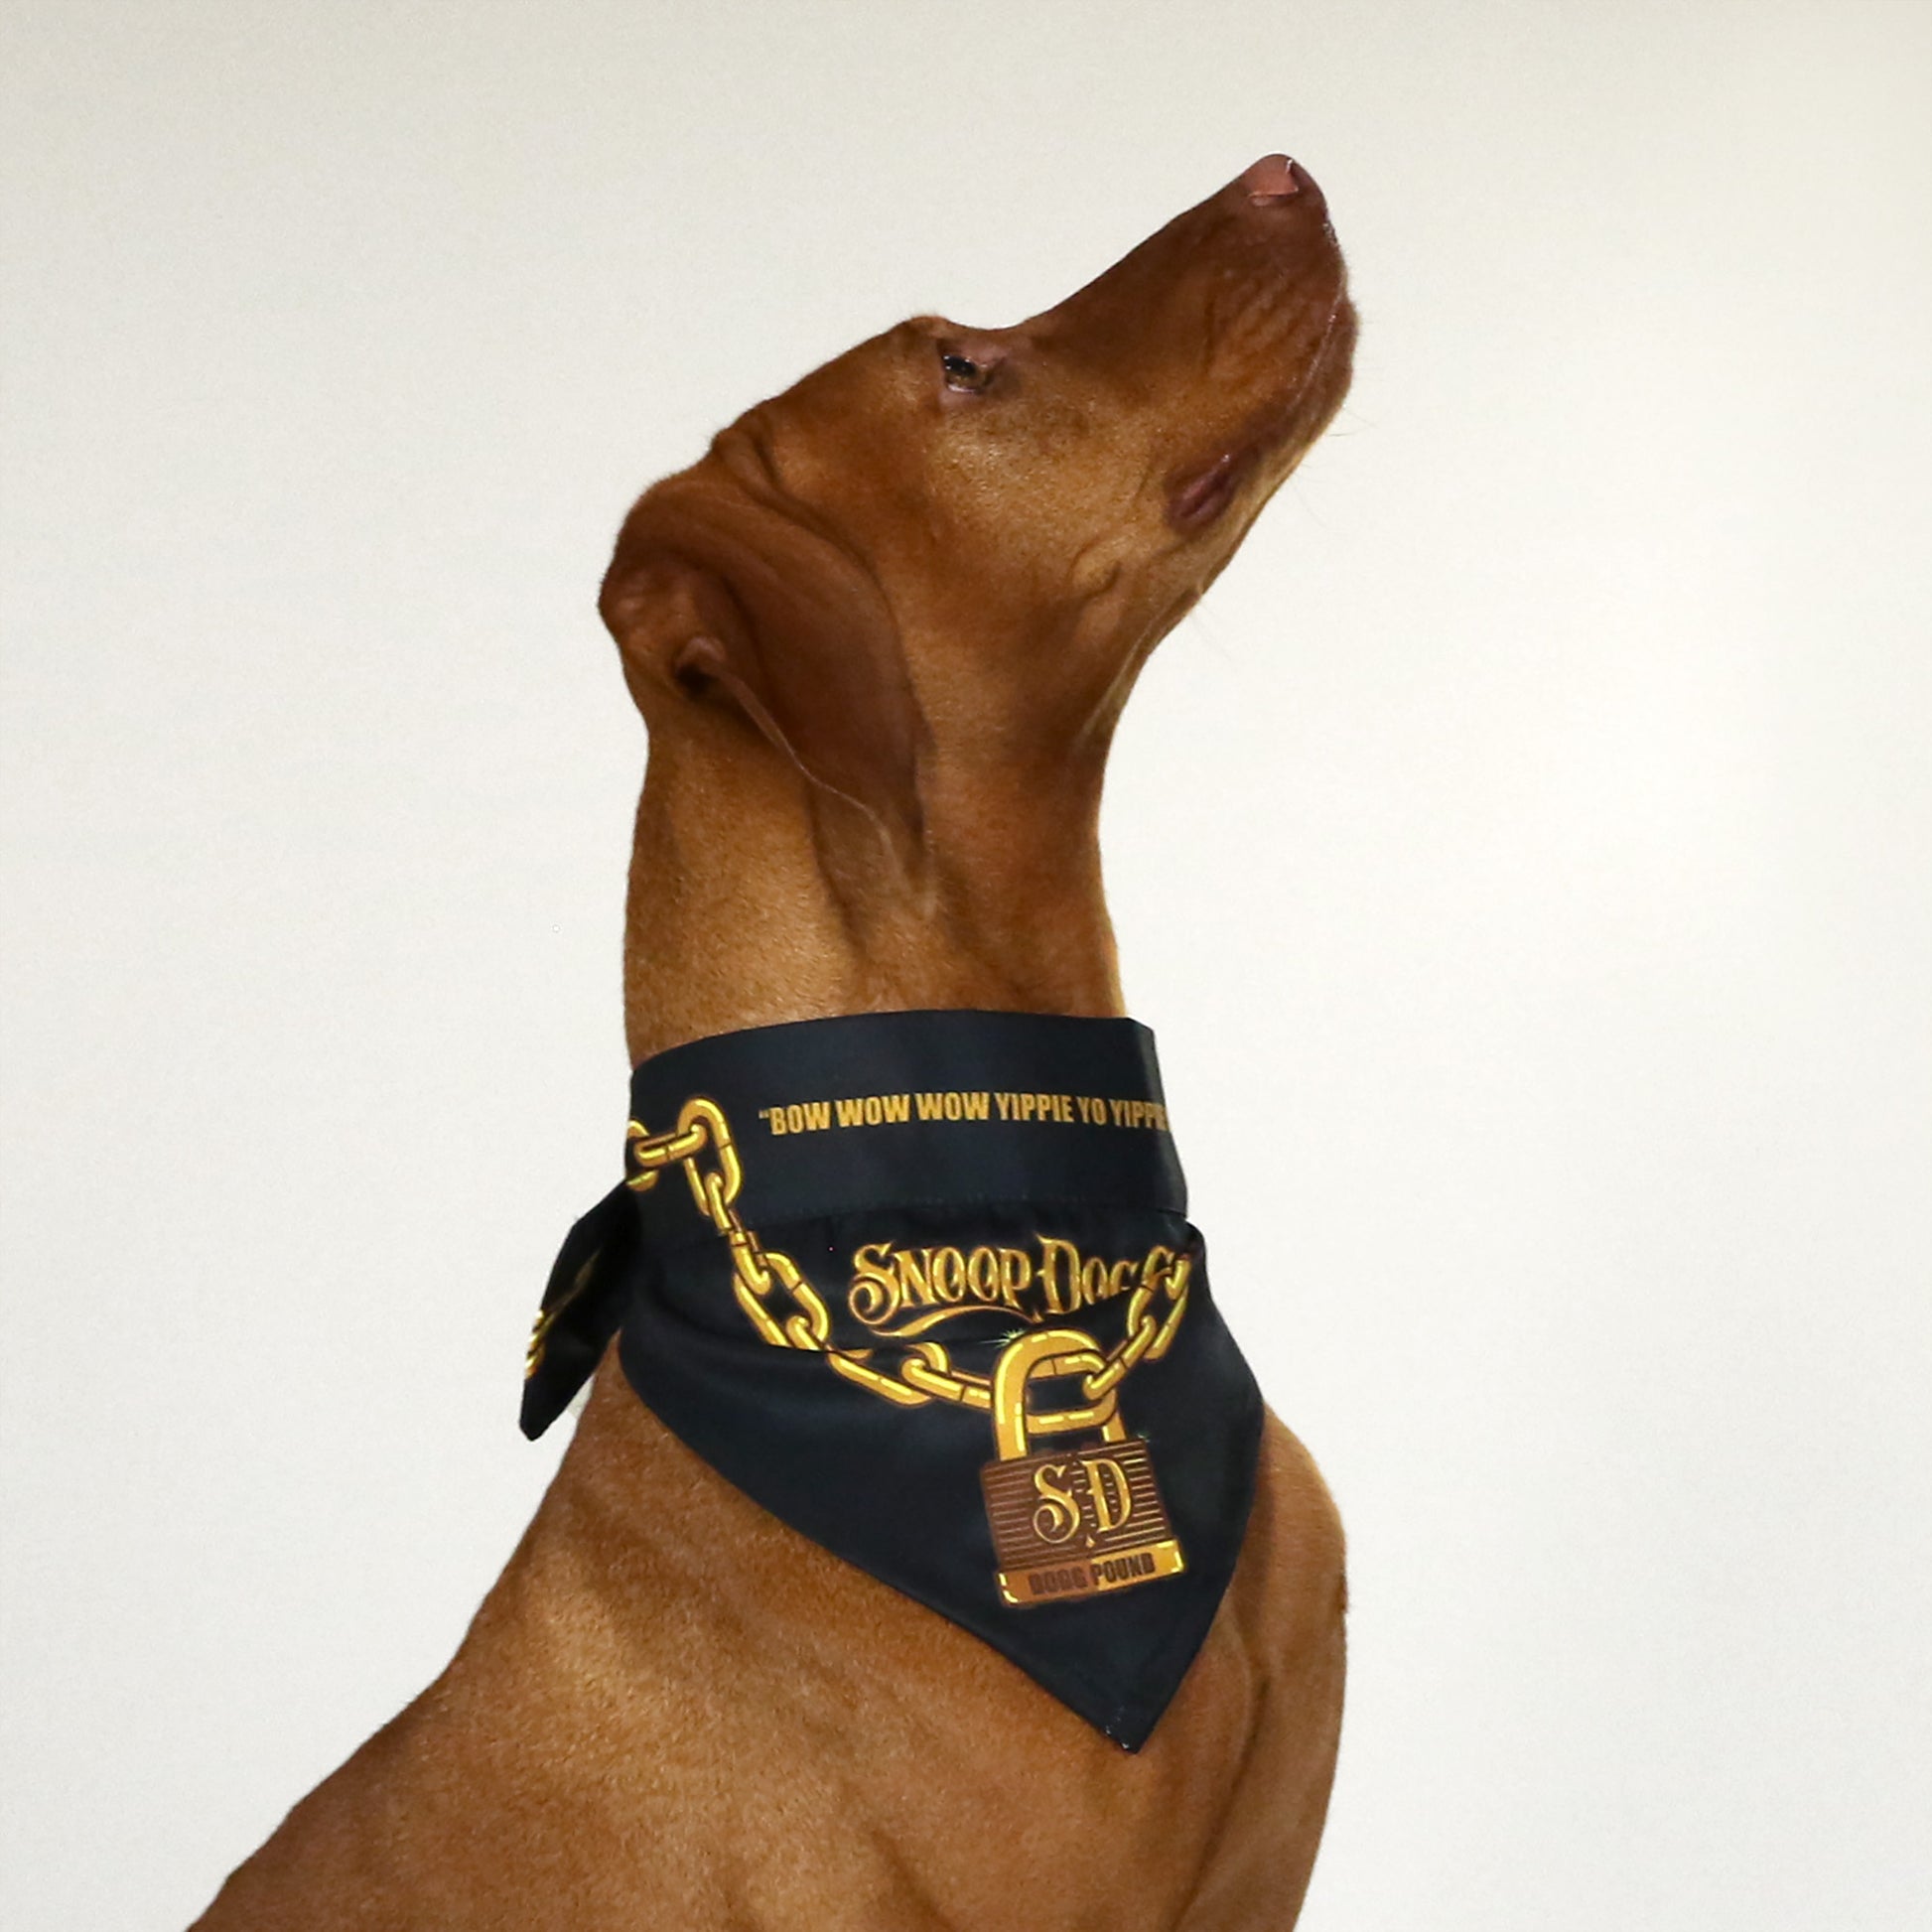 Rosie the Vizsla wearing the Off the Chain Deluxe Pet Bandana in size Medium.